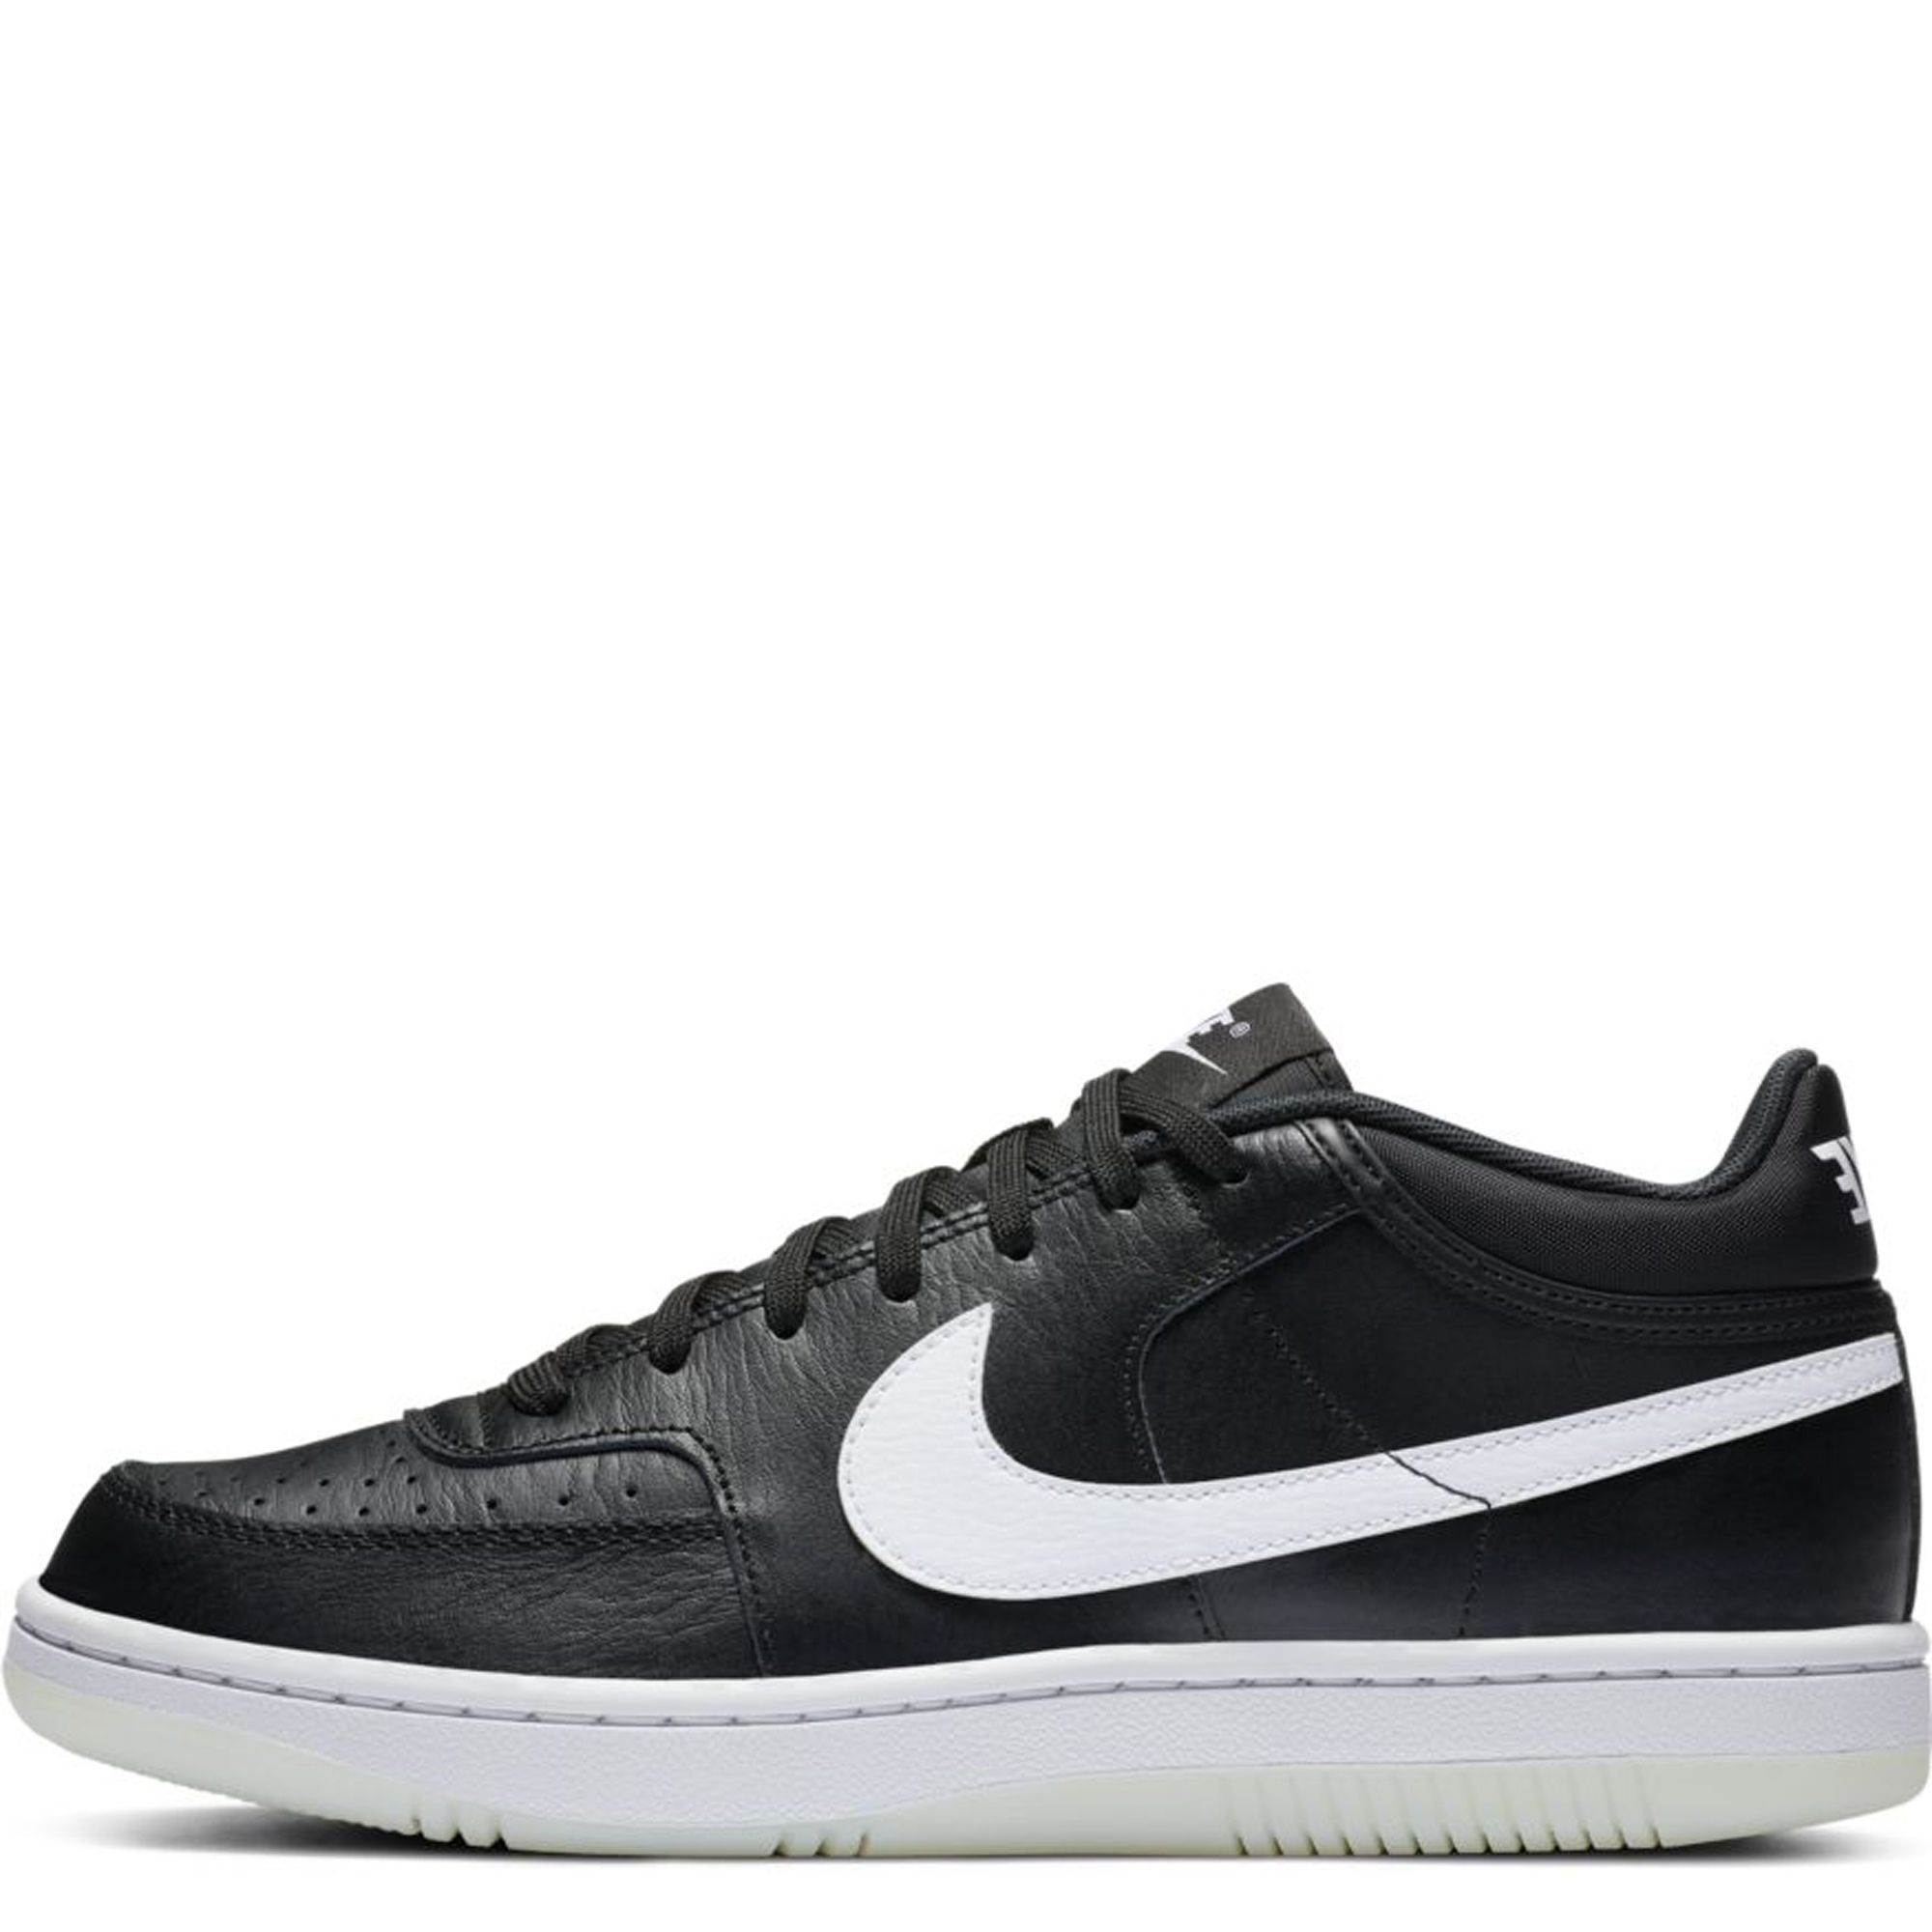  Nike Men's Shoes Sky Force 3/4 Black White CT8448-001  (Numeric_7_Point_5)